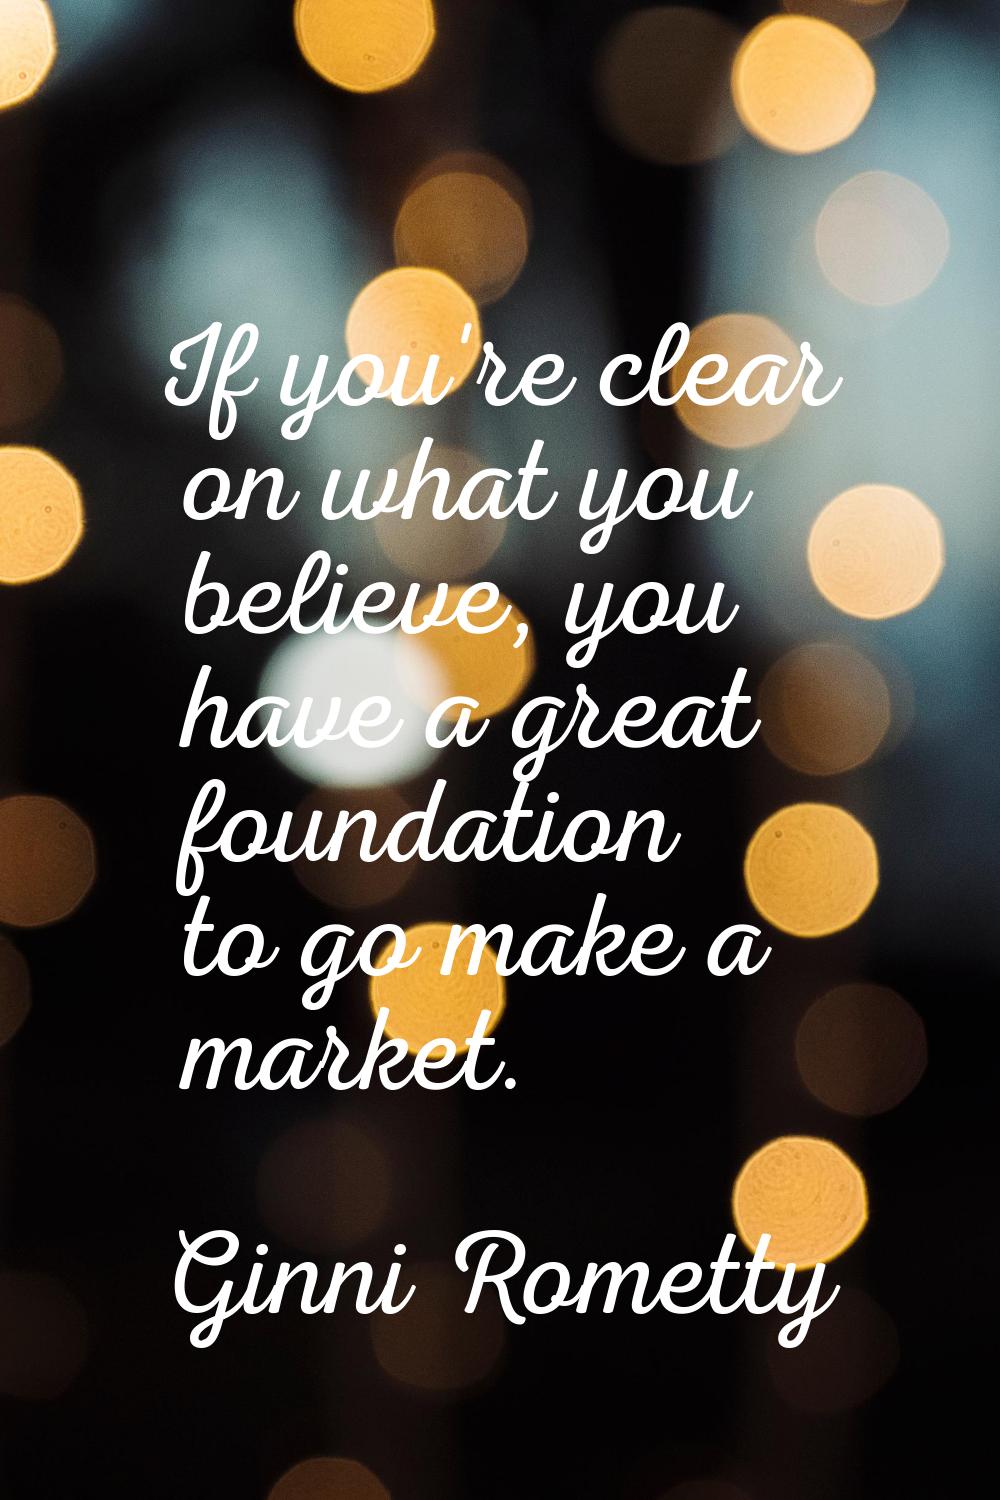 If you're clear on what you believe, you have a great foundation to go make a market.